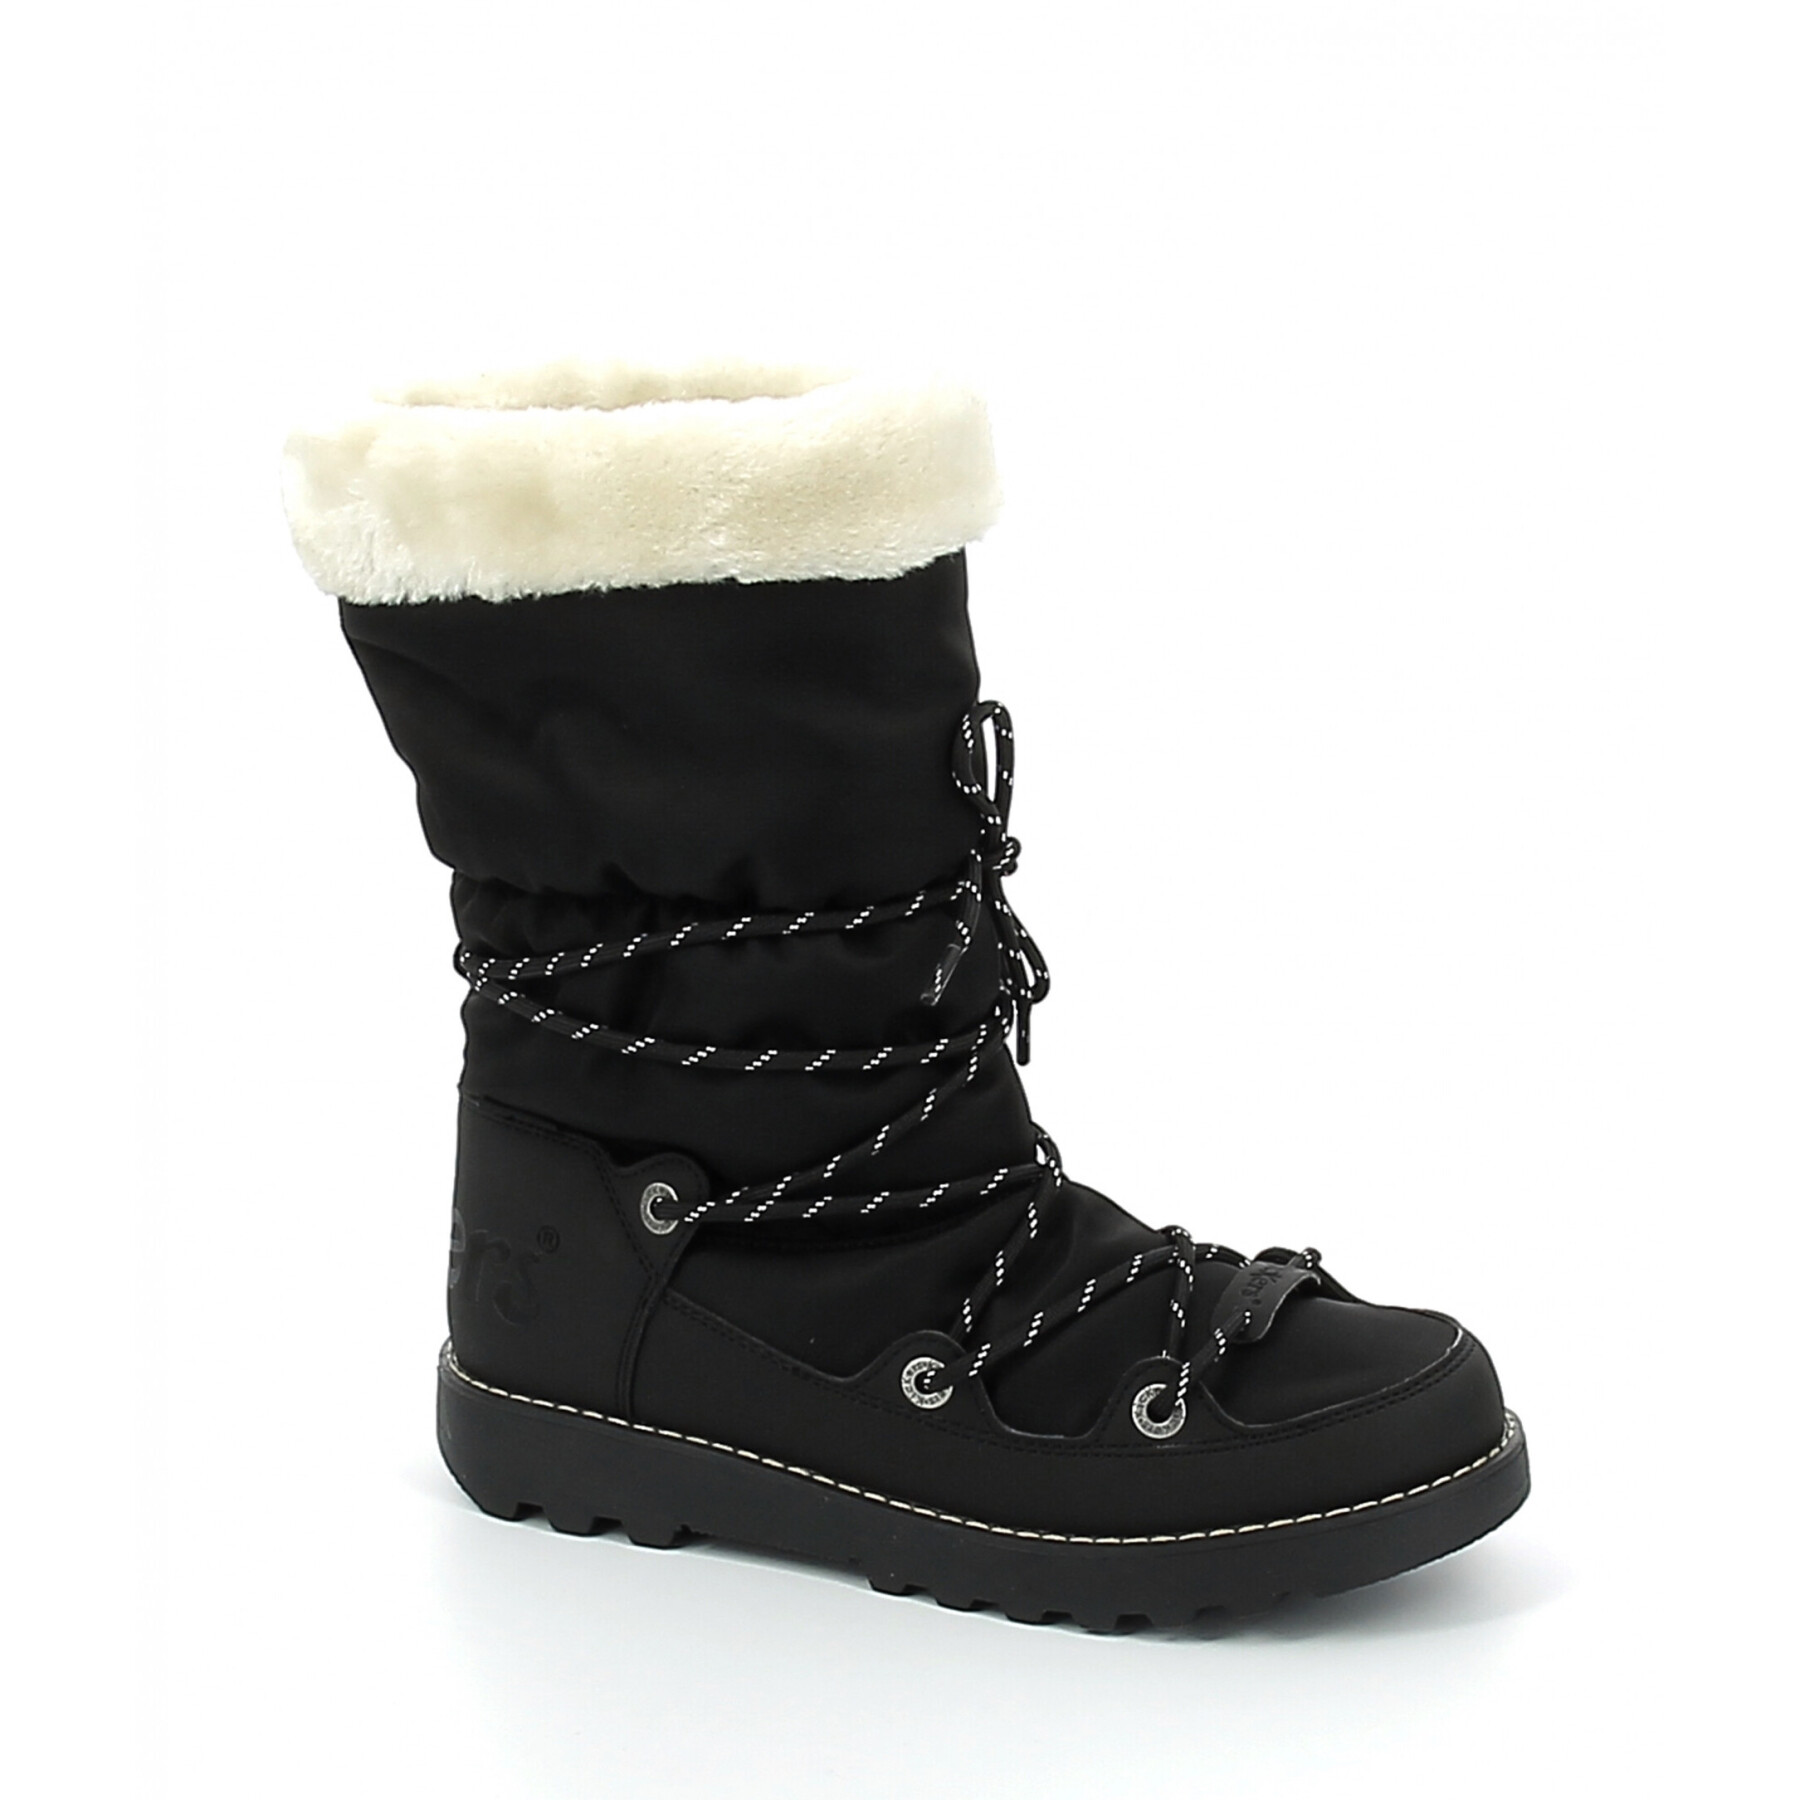 Women's leather boots Kickers Neosnow